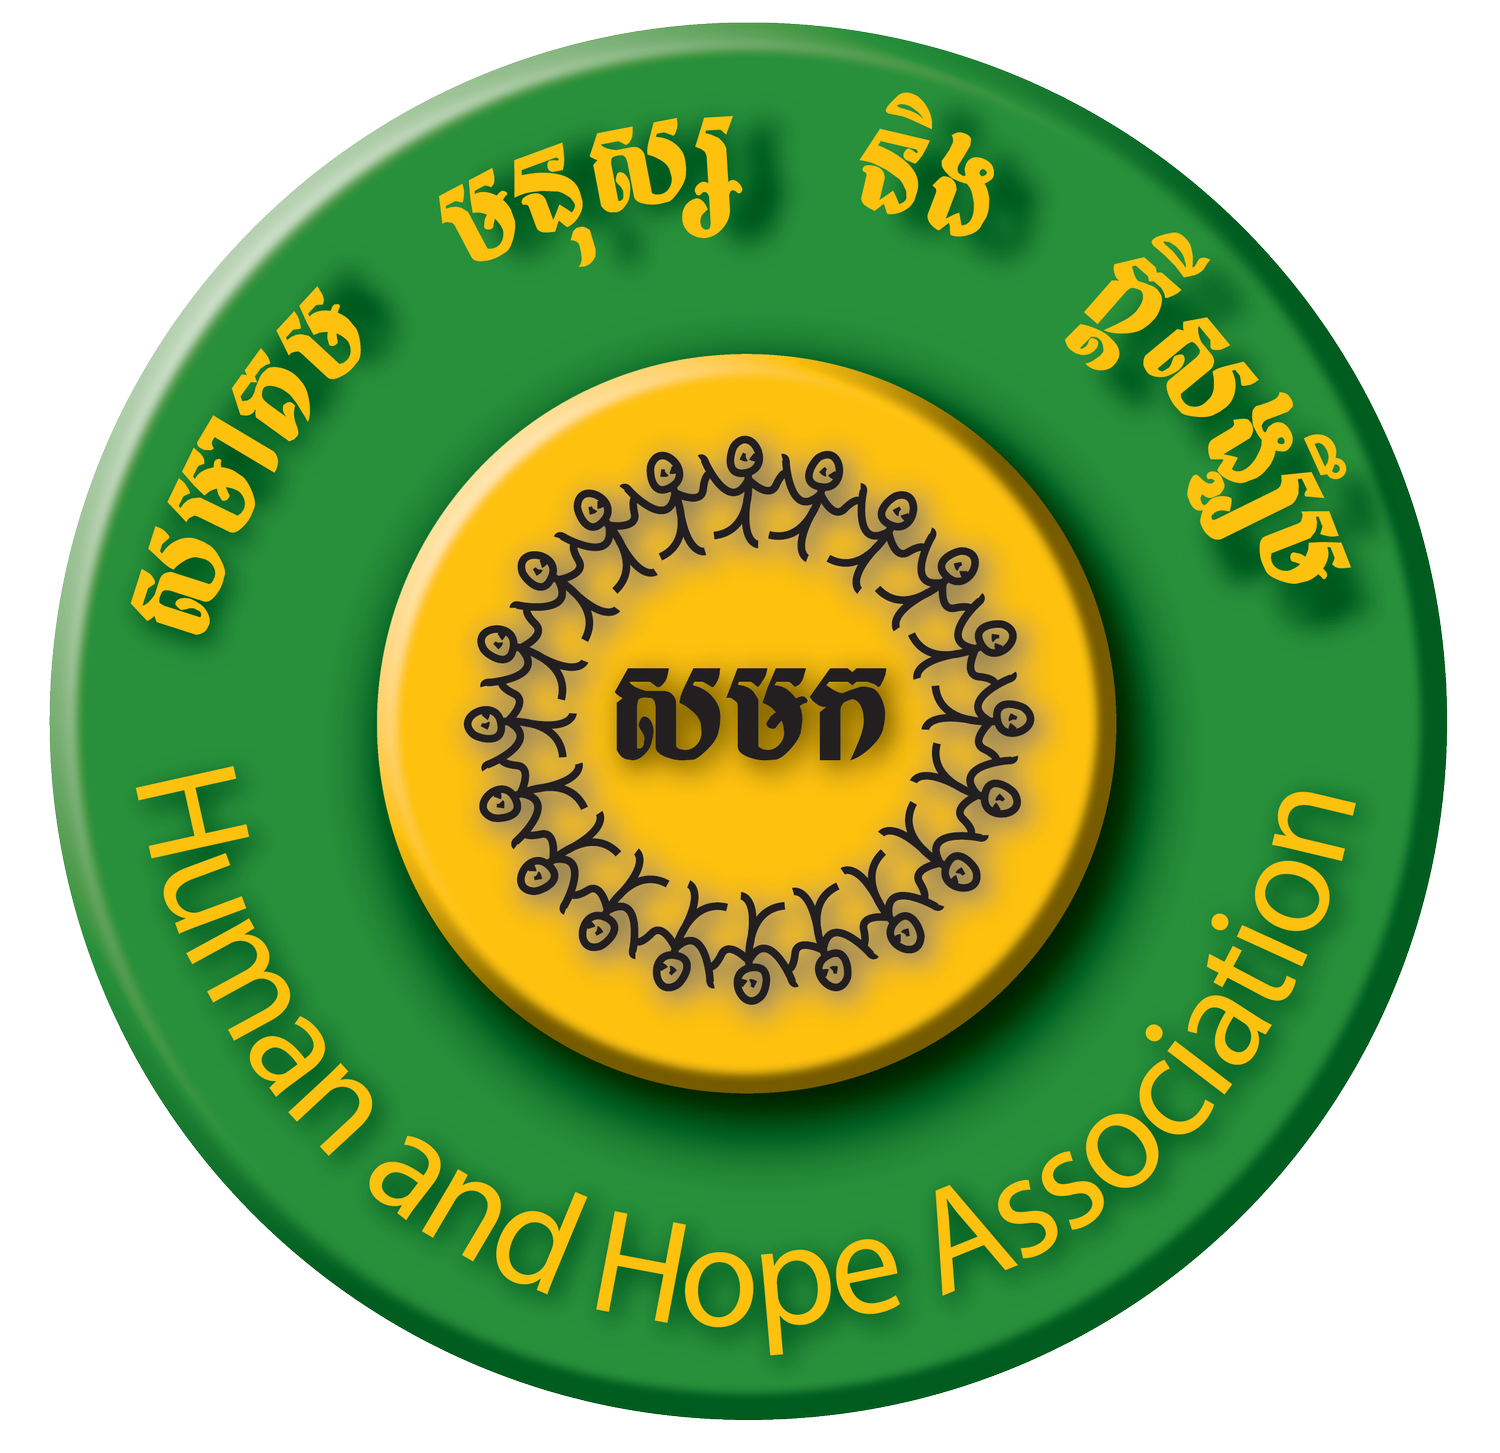 Human and Hope Association - Siem Reap, Cambodia